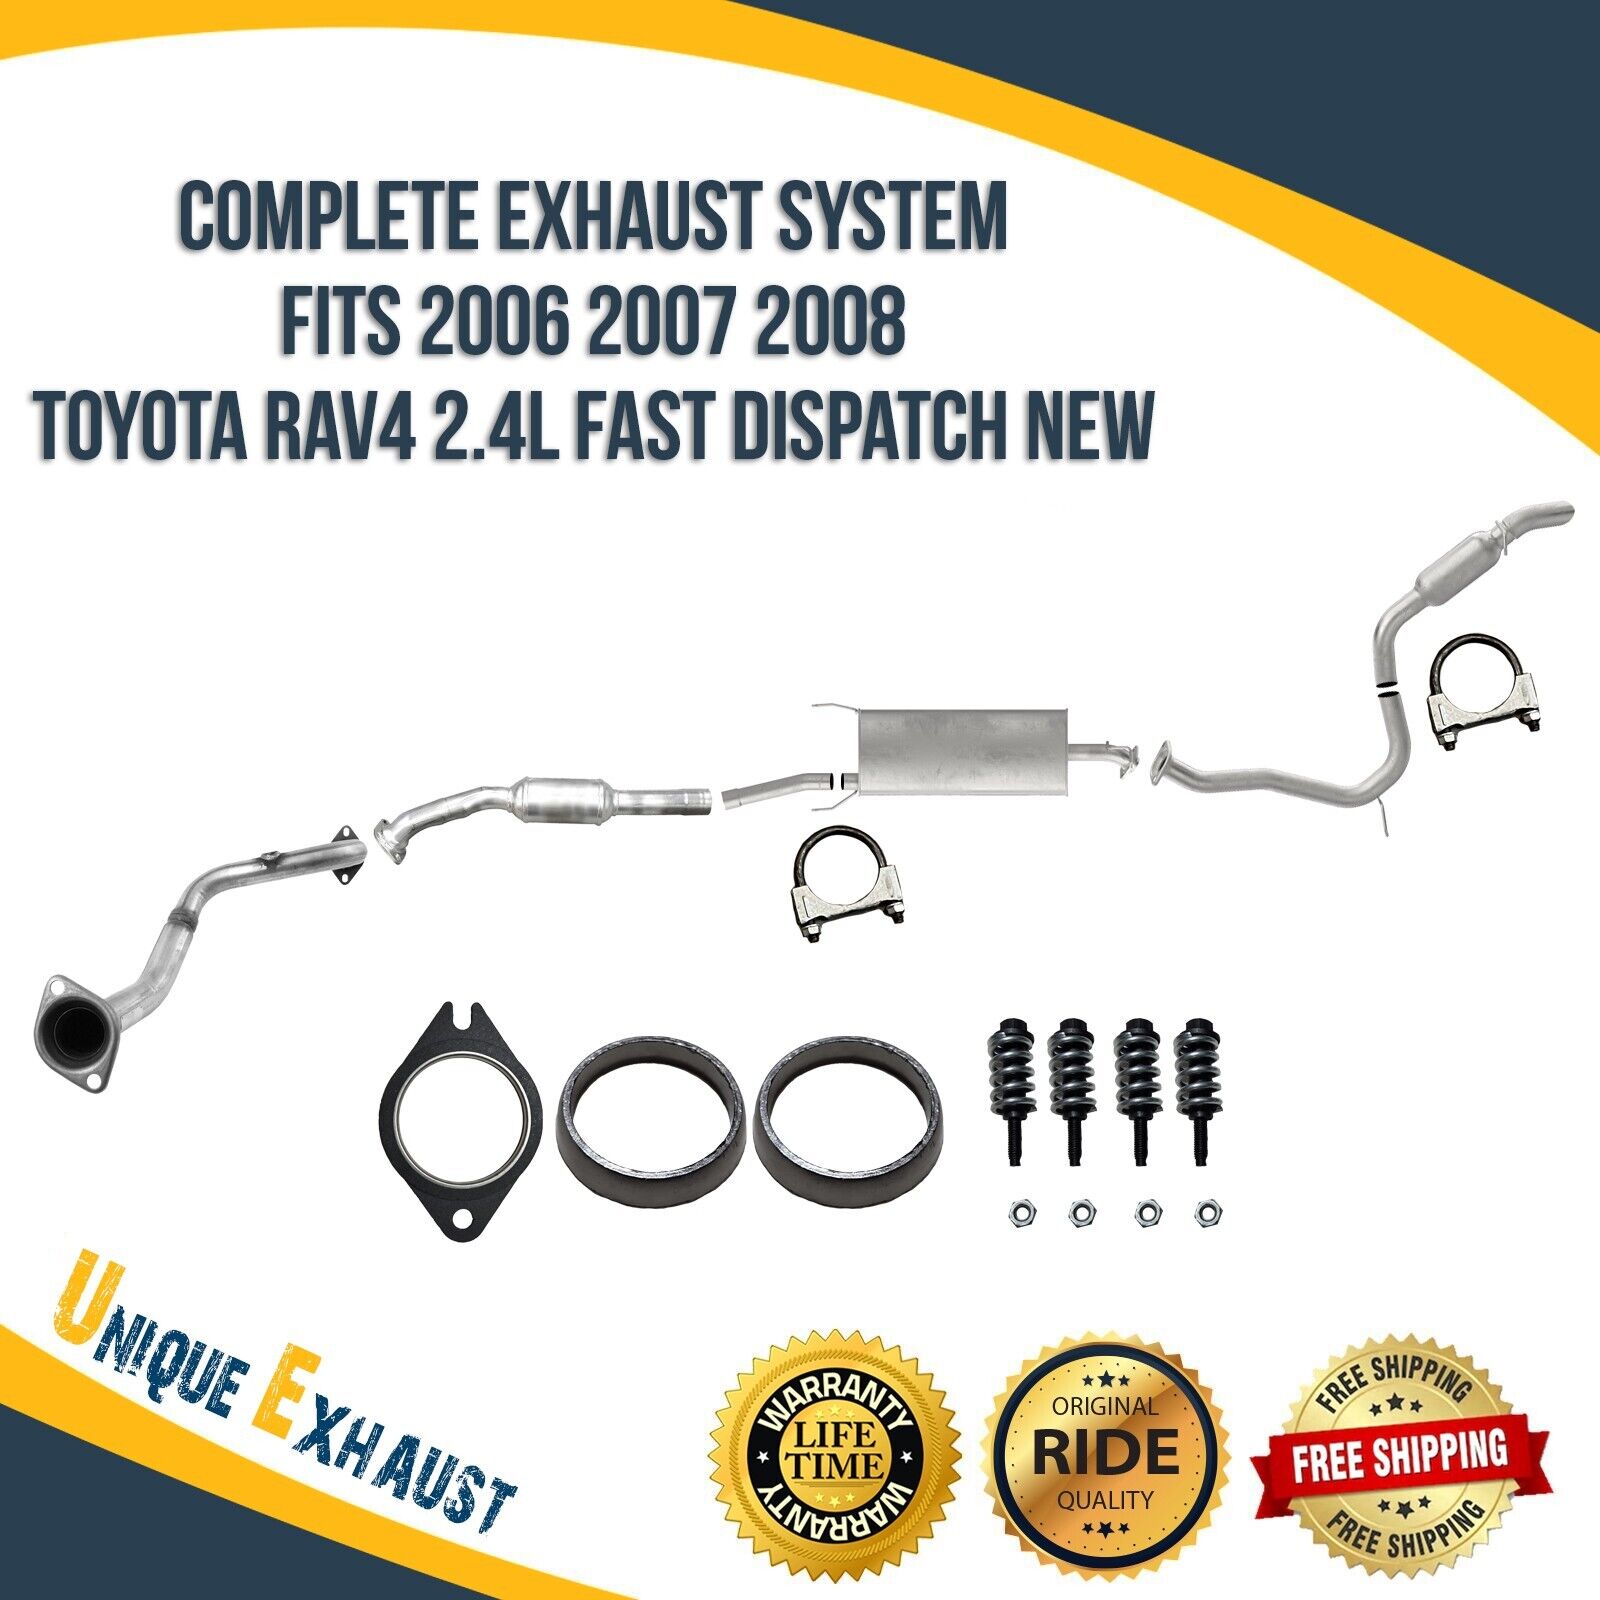 Complete Exhaust System Fits 2006 2007 2008 Toyota RAV4 2.4L Fast Dispatch New